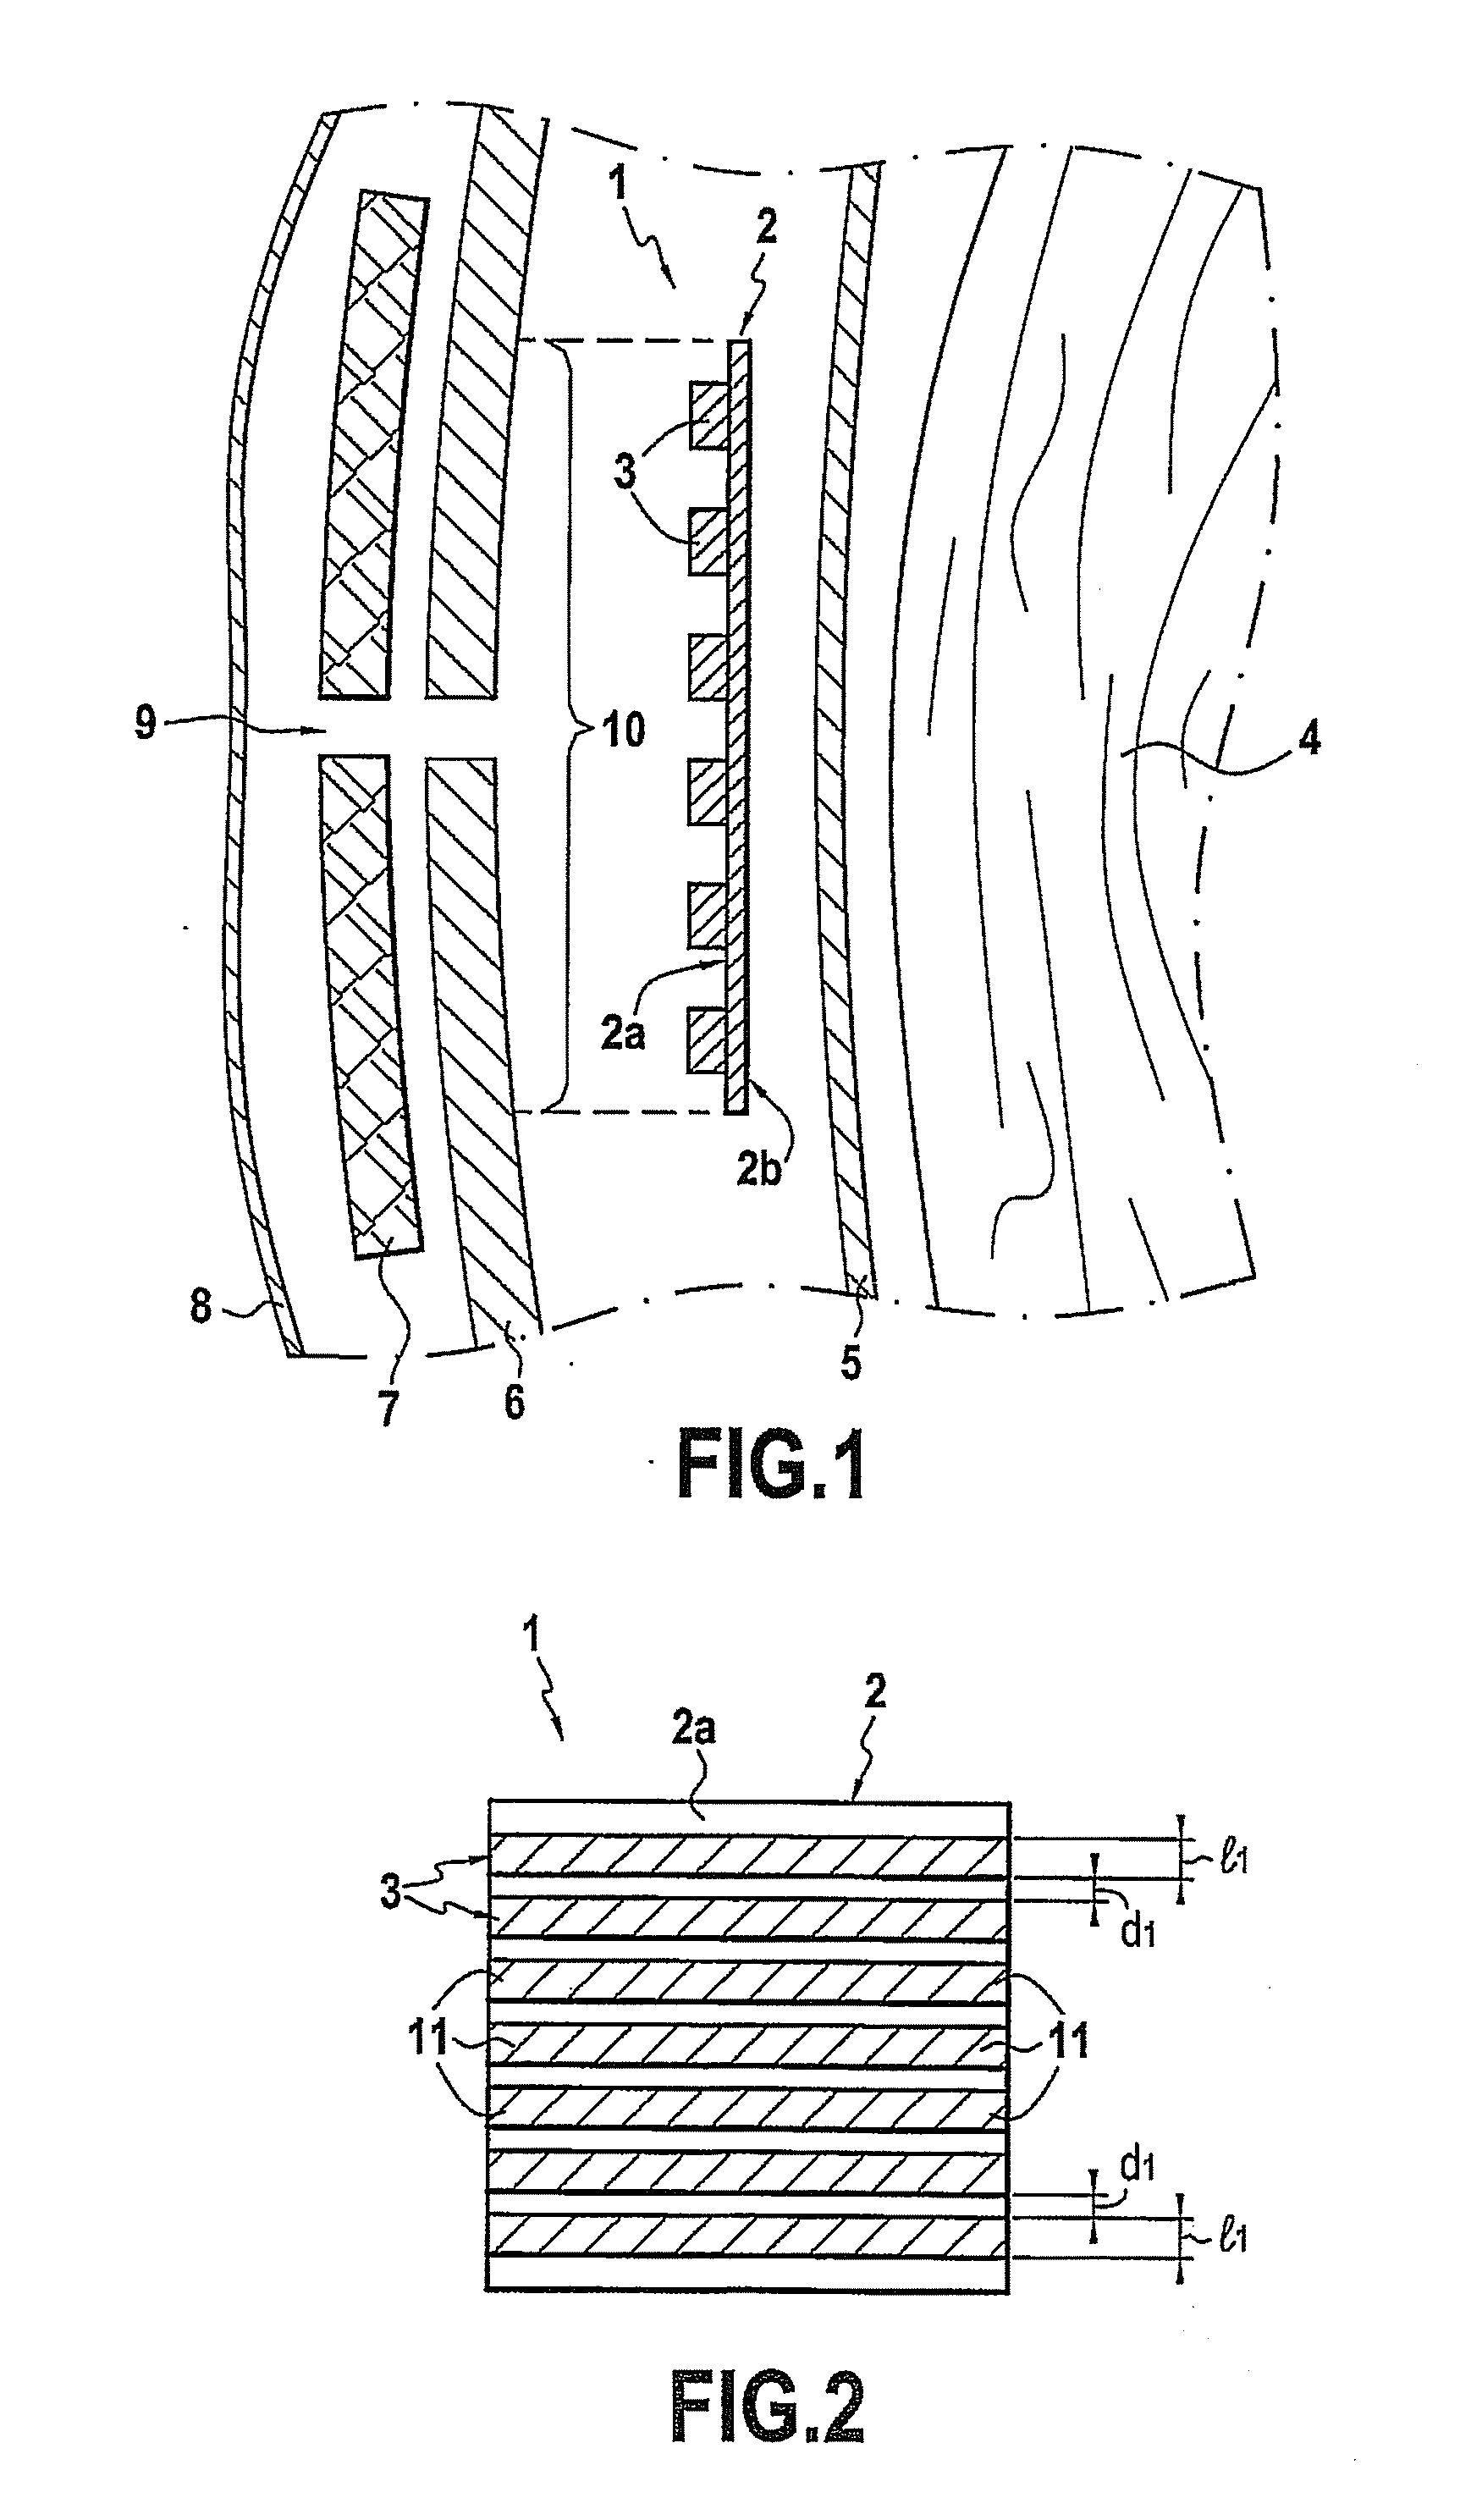 Textile implant, in particular for repairing hernias